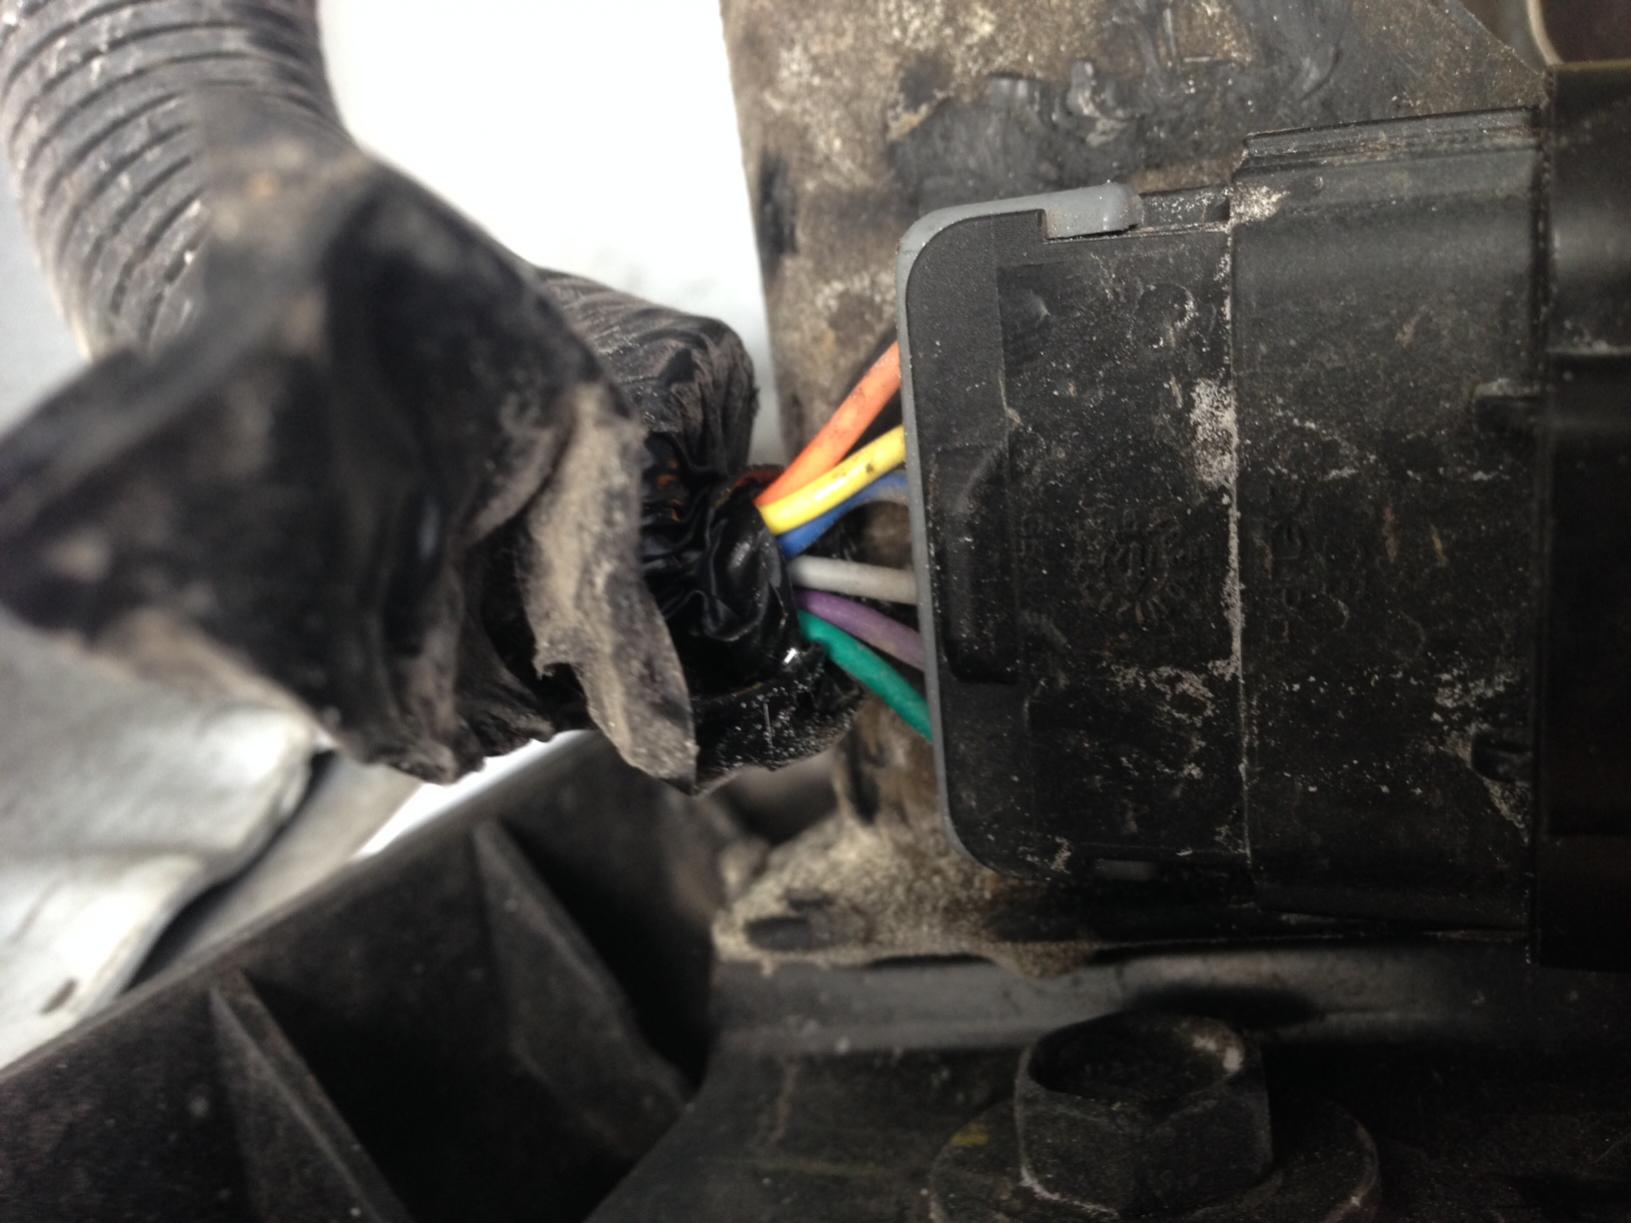 Mystery connector/Trailer wiring? - Chevrolet Forum - Chevy Enthusiasts